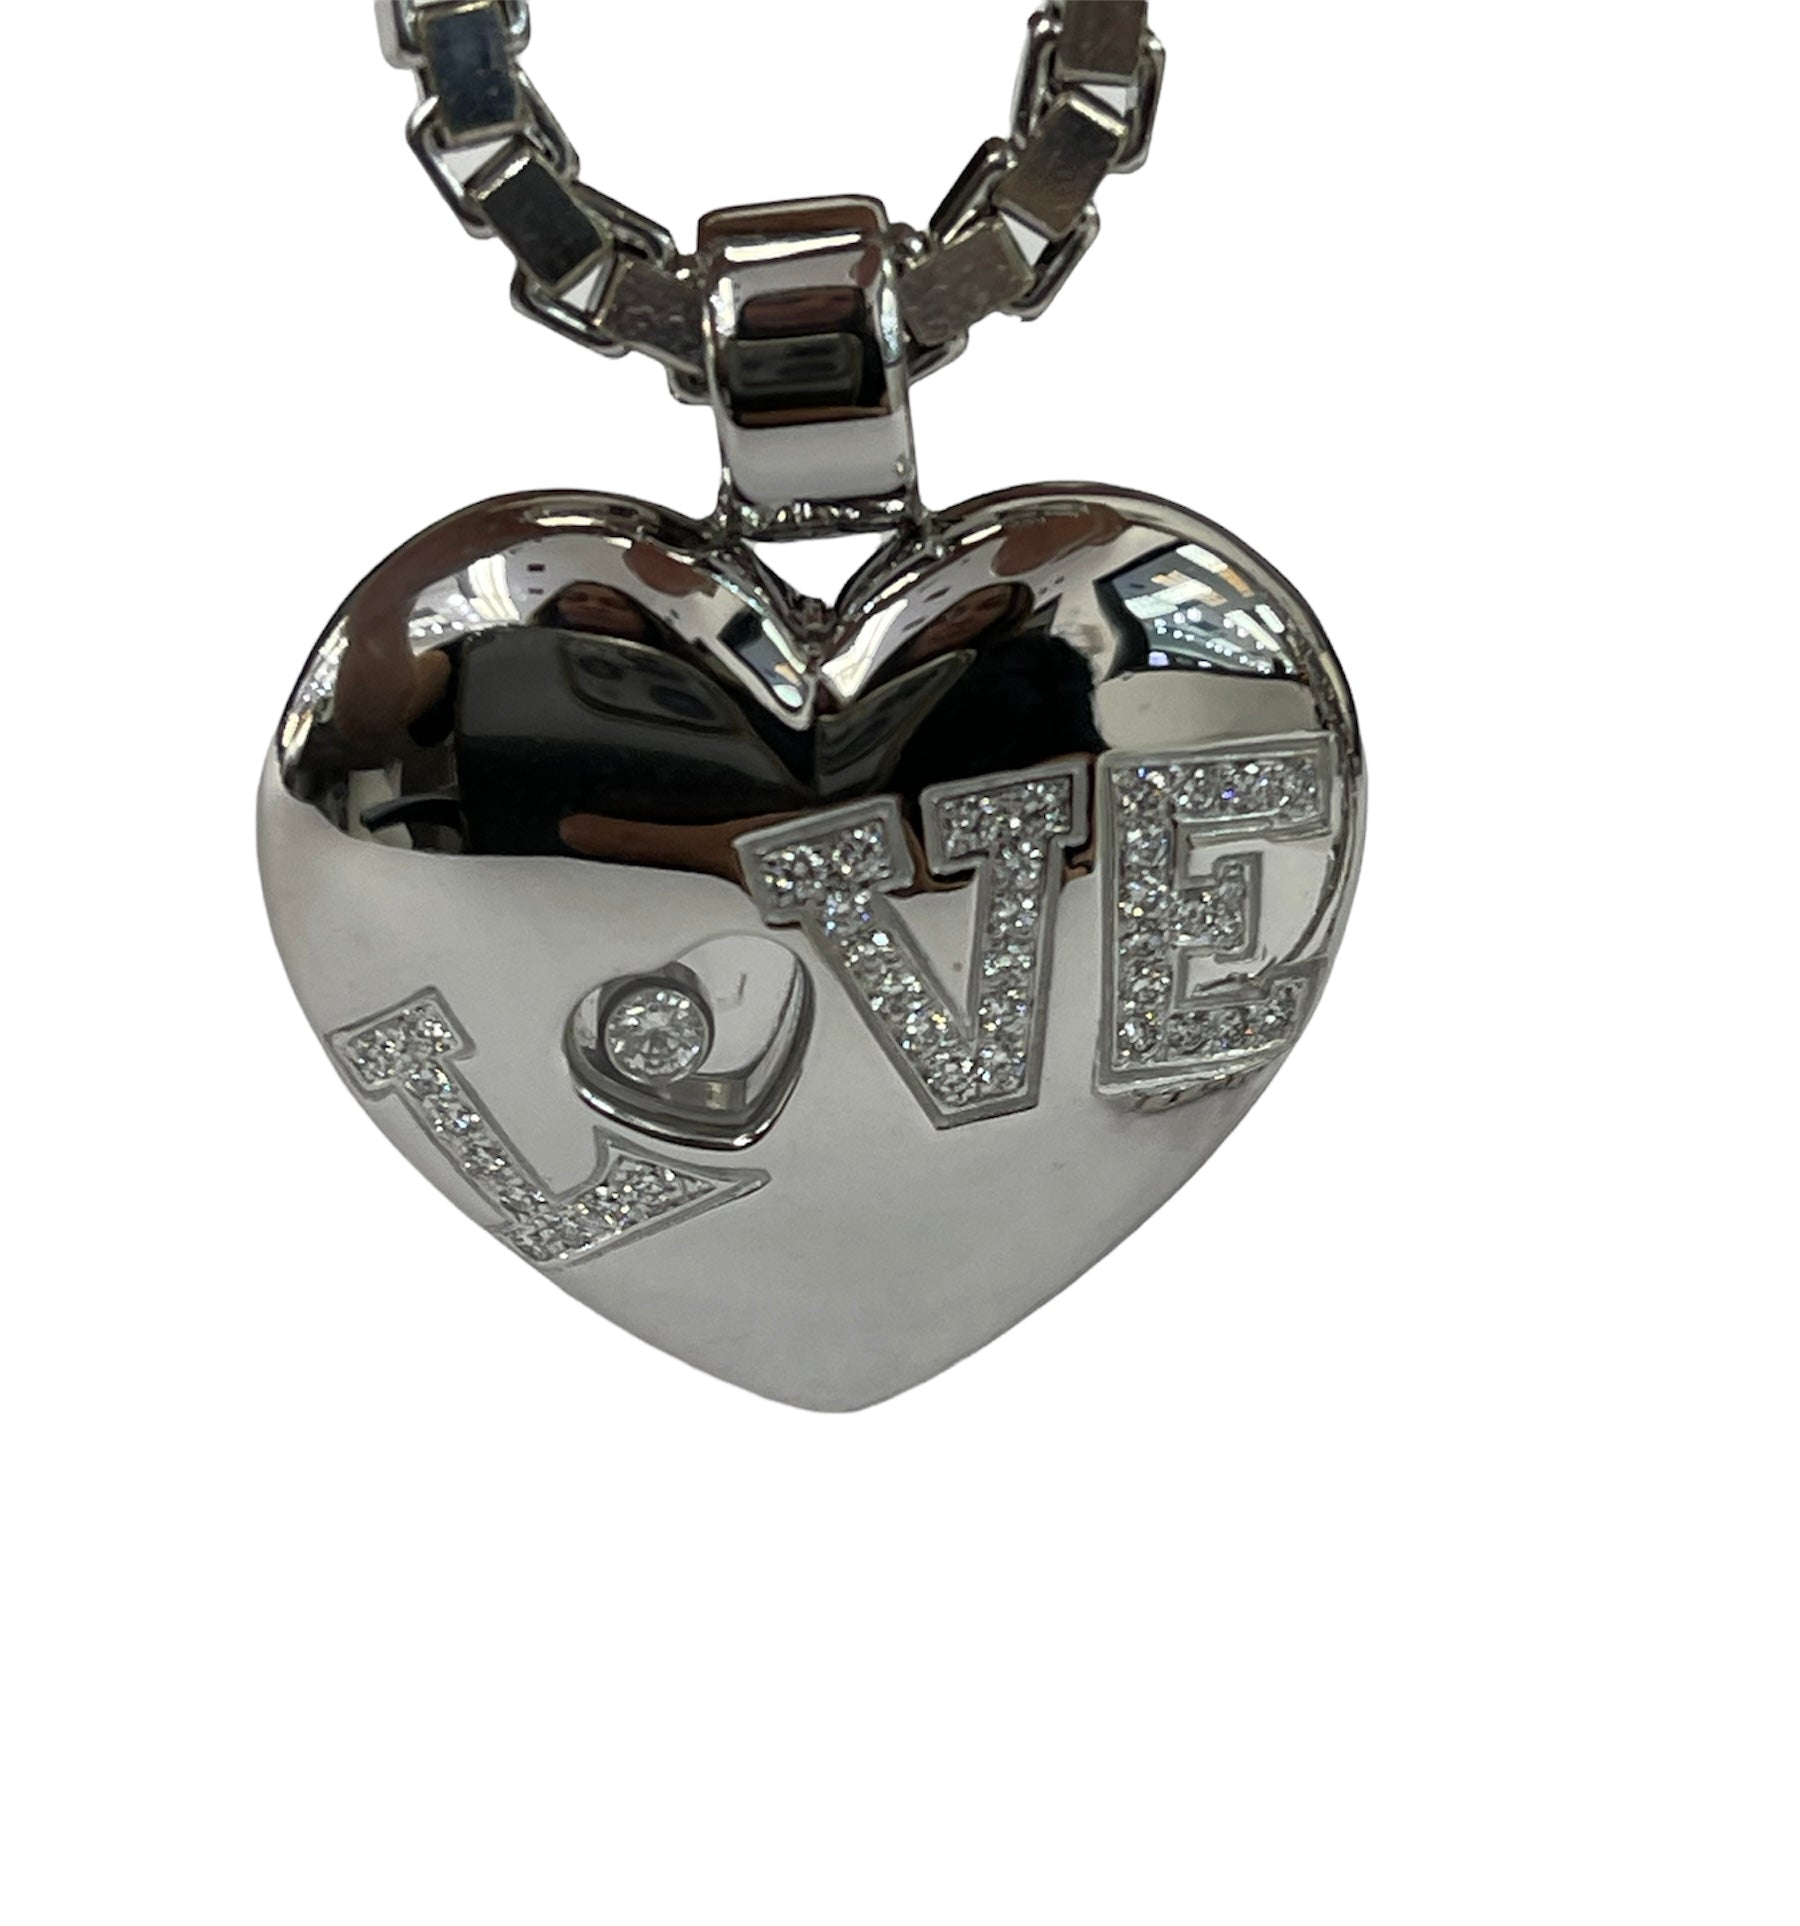 Chopard 18K White Gold Floating Happy Diamond Love Heart Necklace